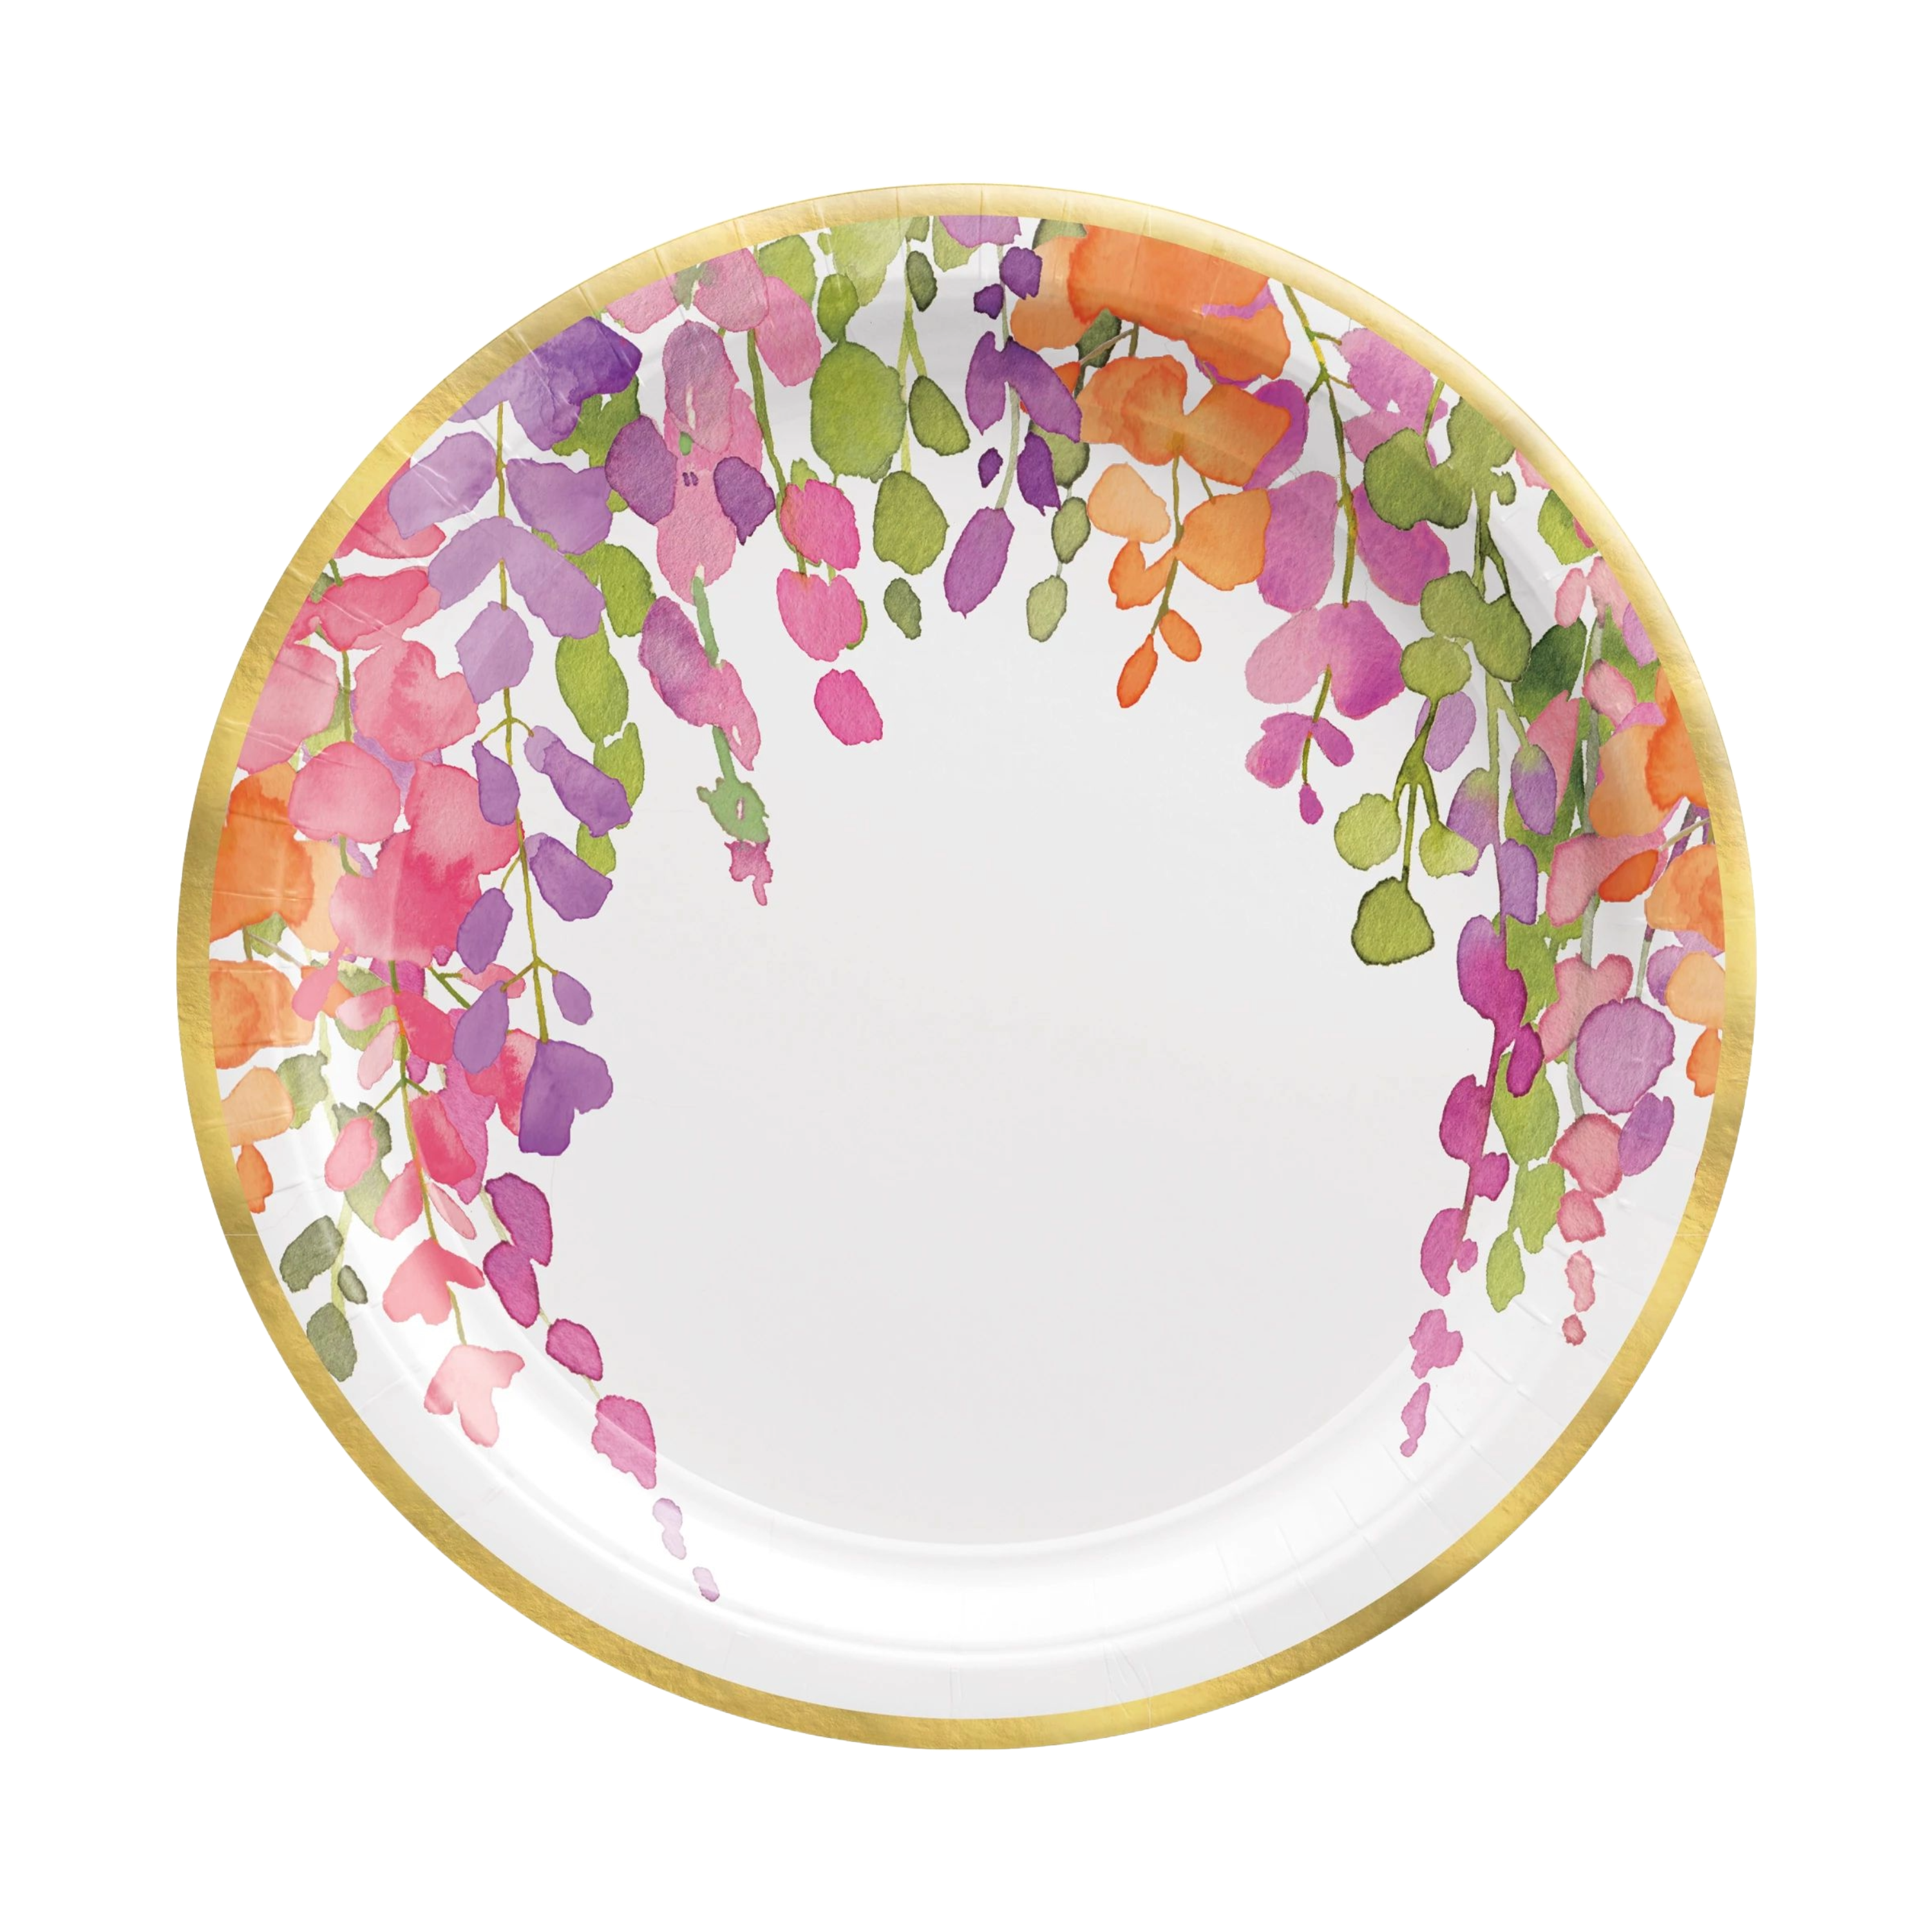 Romantic Floral Party White Dinner Plates, Pack of 8 - Amazing Pinatas 